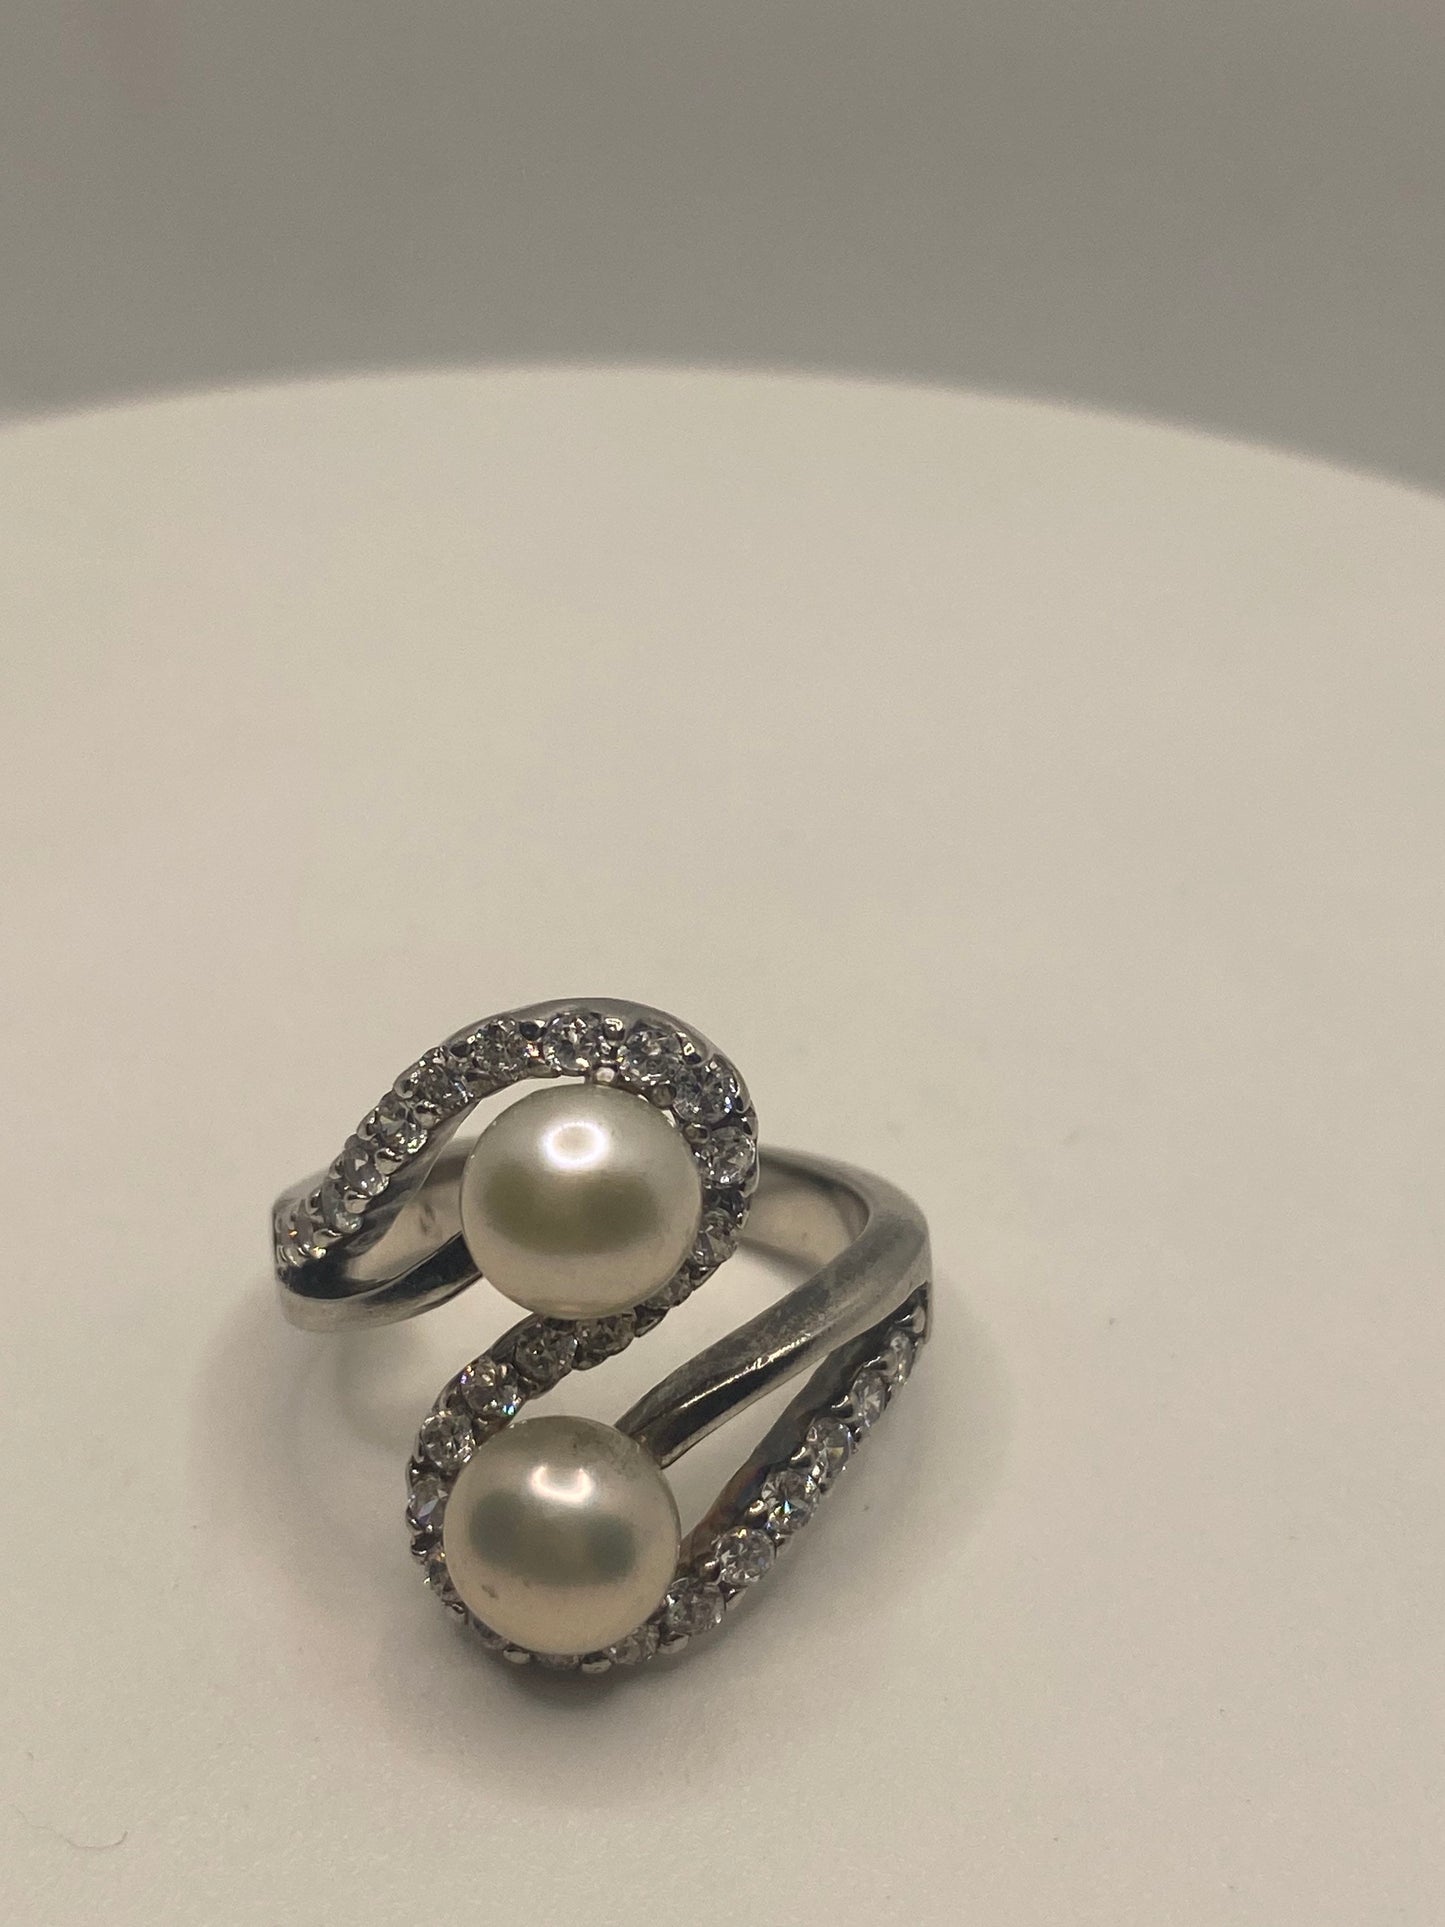 Vintage White Pearl 925 Sterling Silver Cocktail Ring Size 8